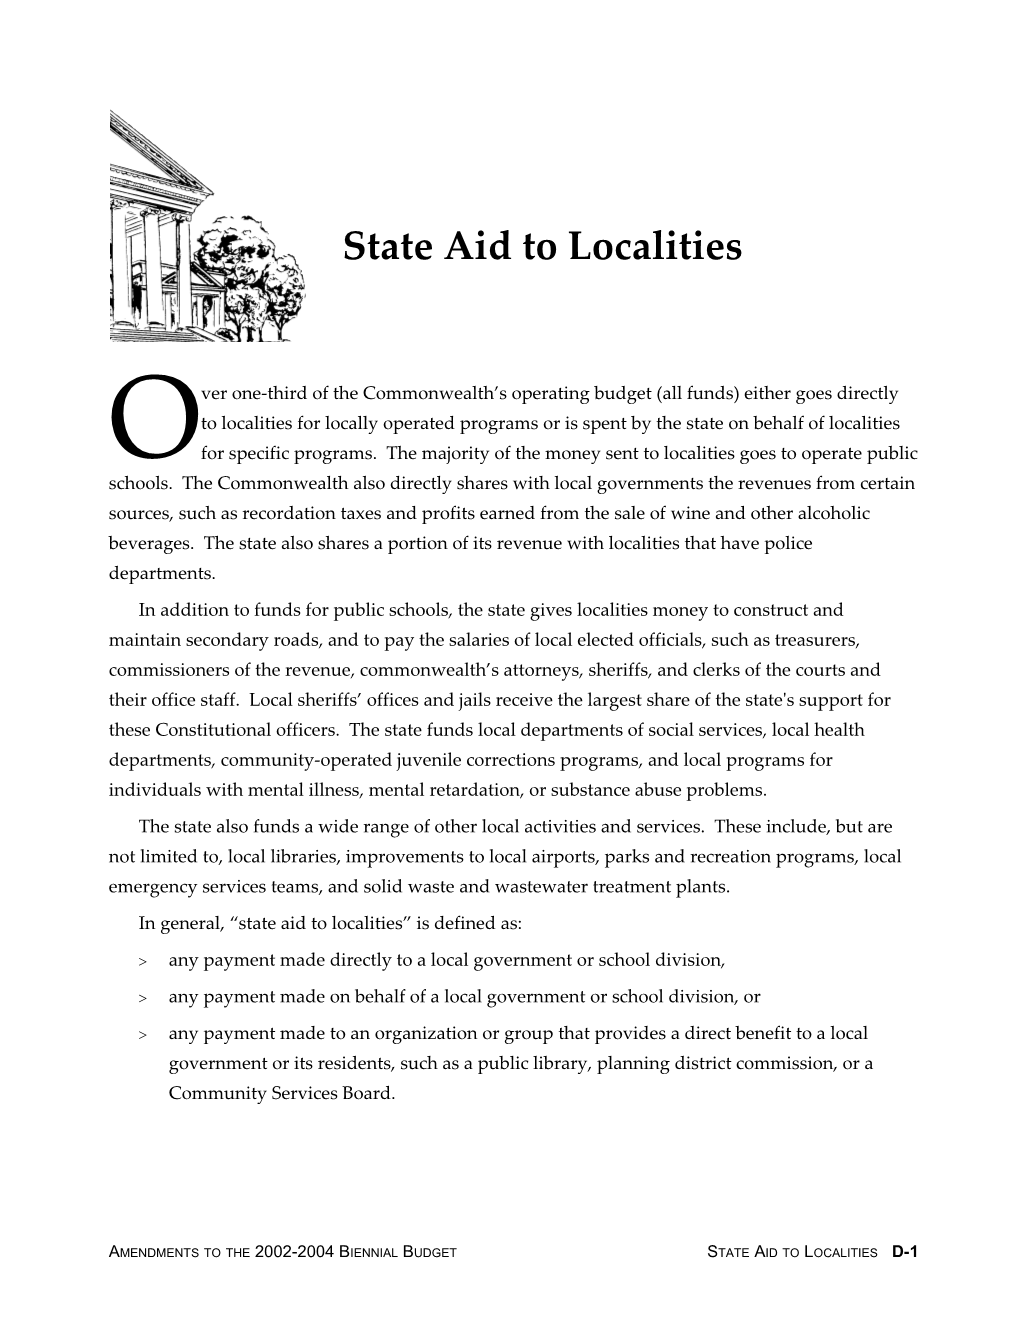 Aid to Localities